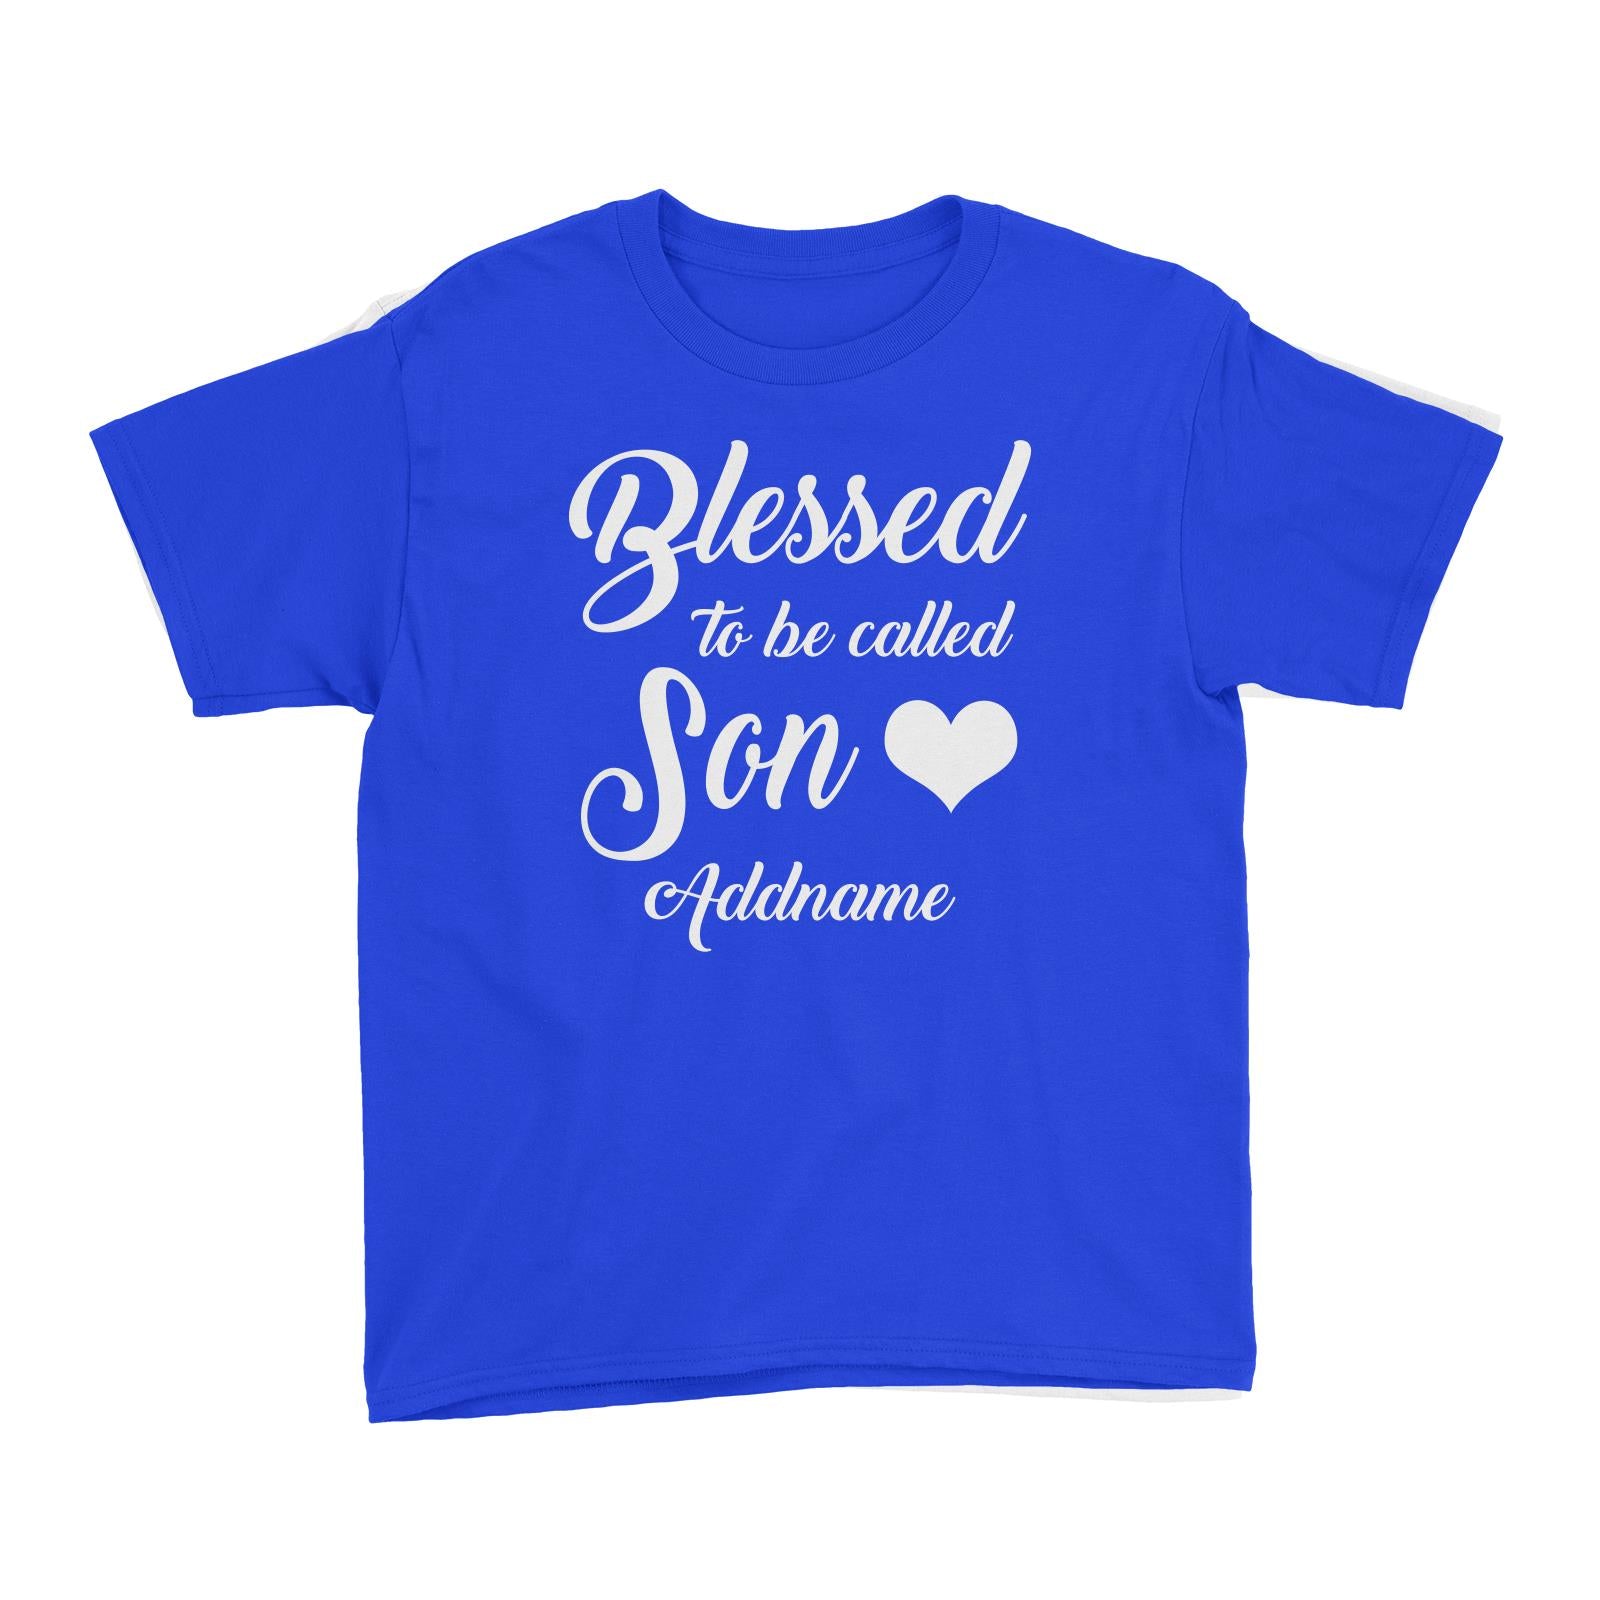 Blessed To Be Called Son Kid's T-Shirt